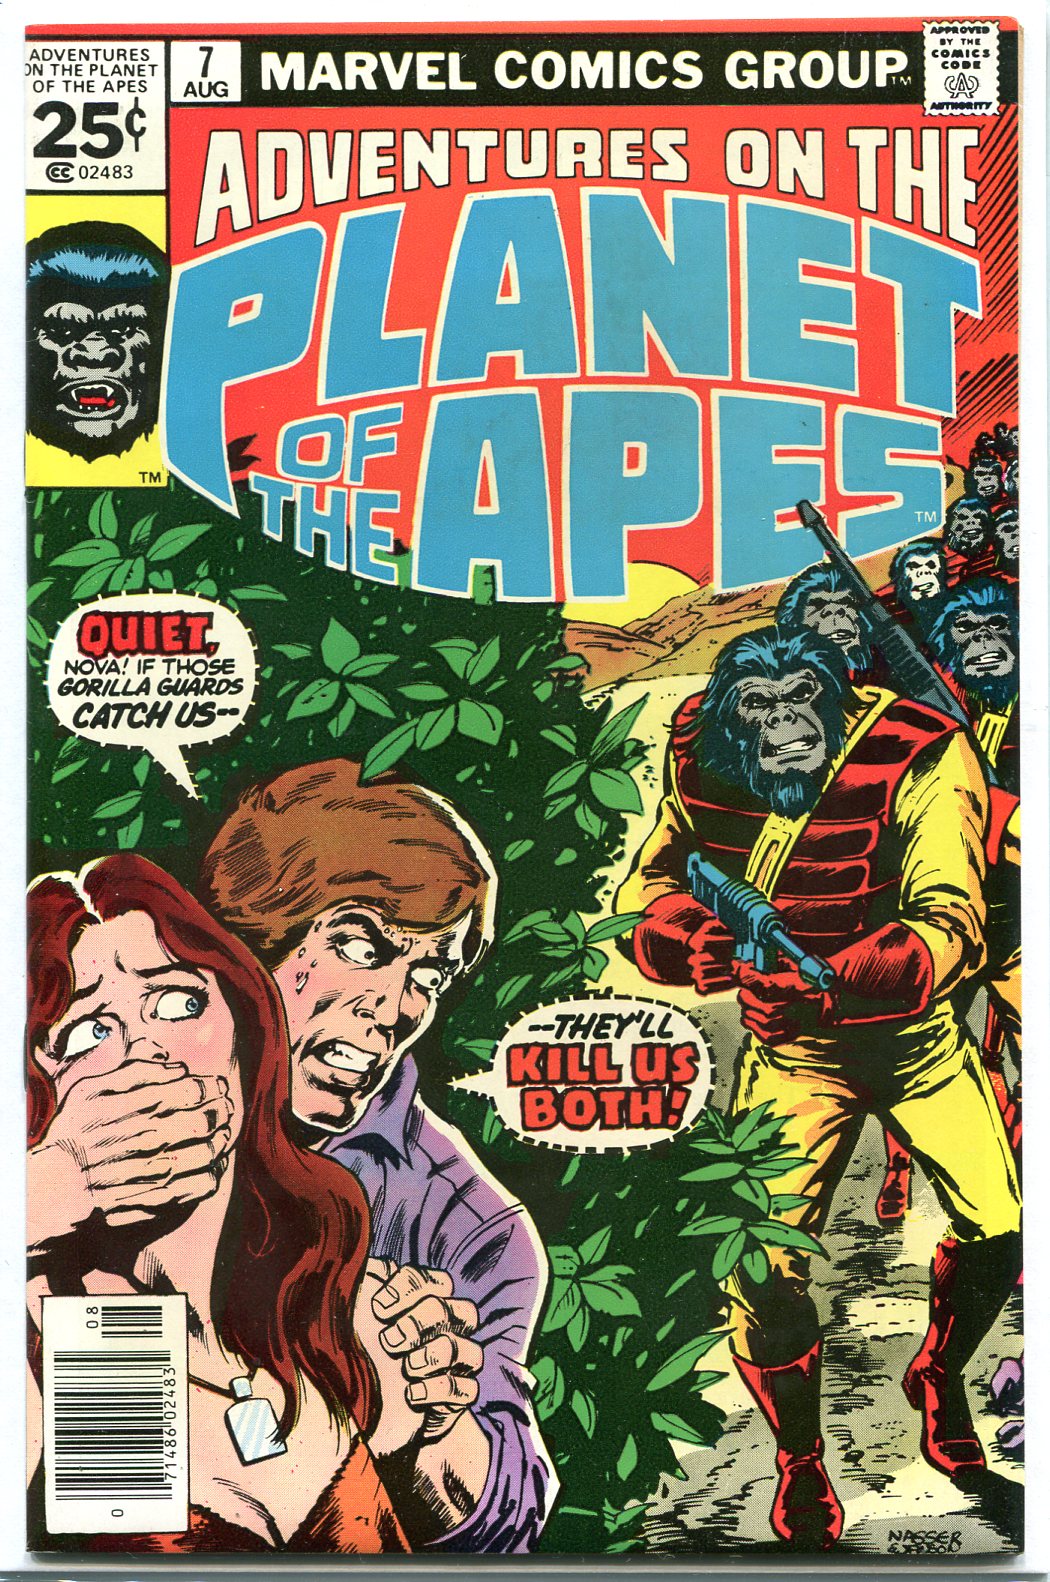 ADVENTURES ON THE PLANET OF THE APES